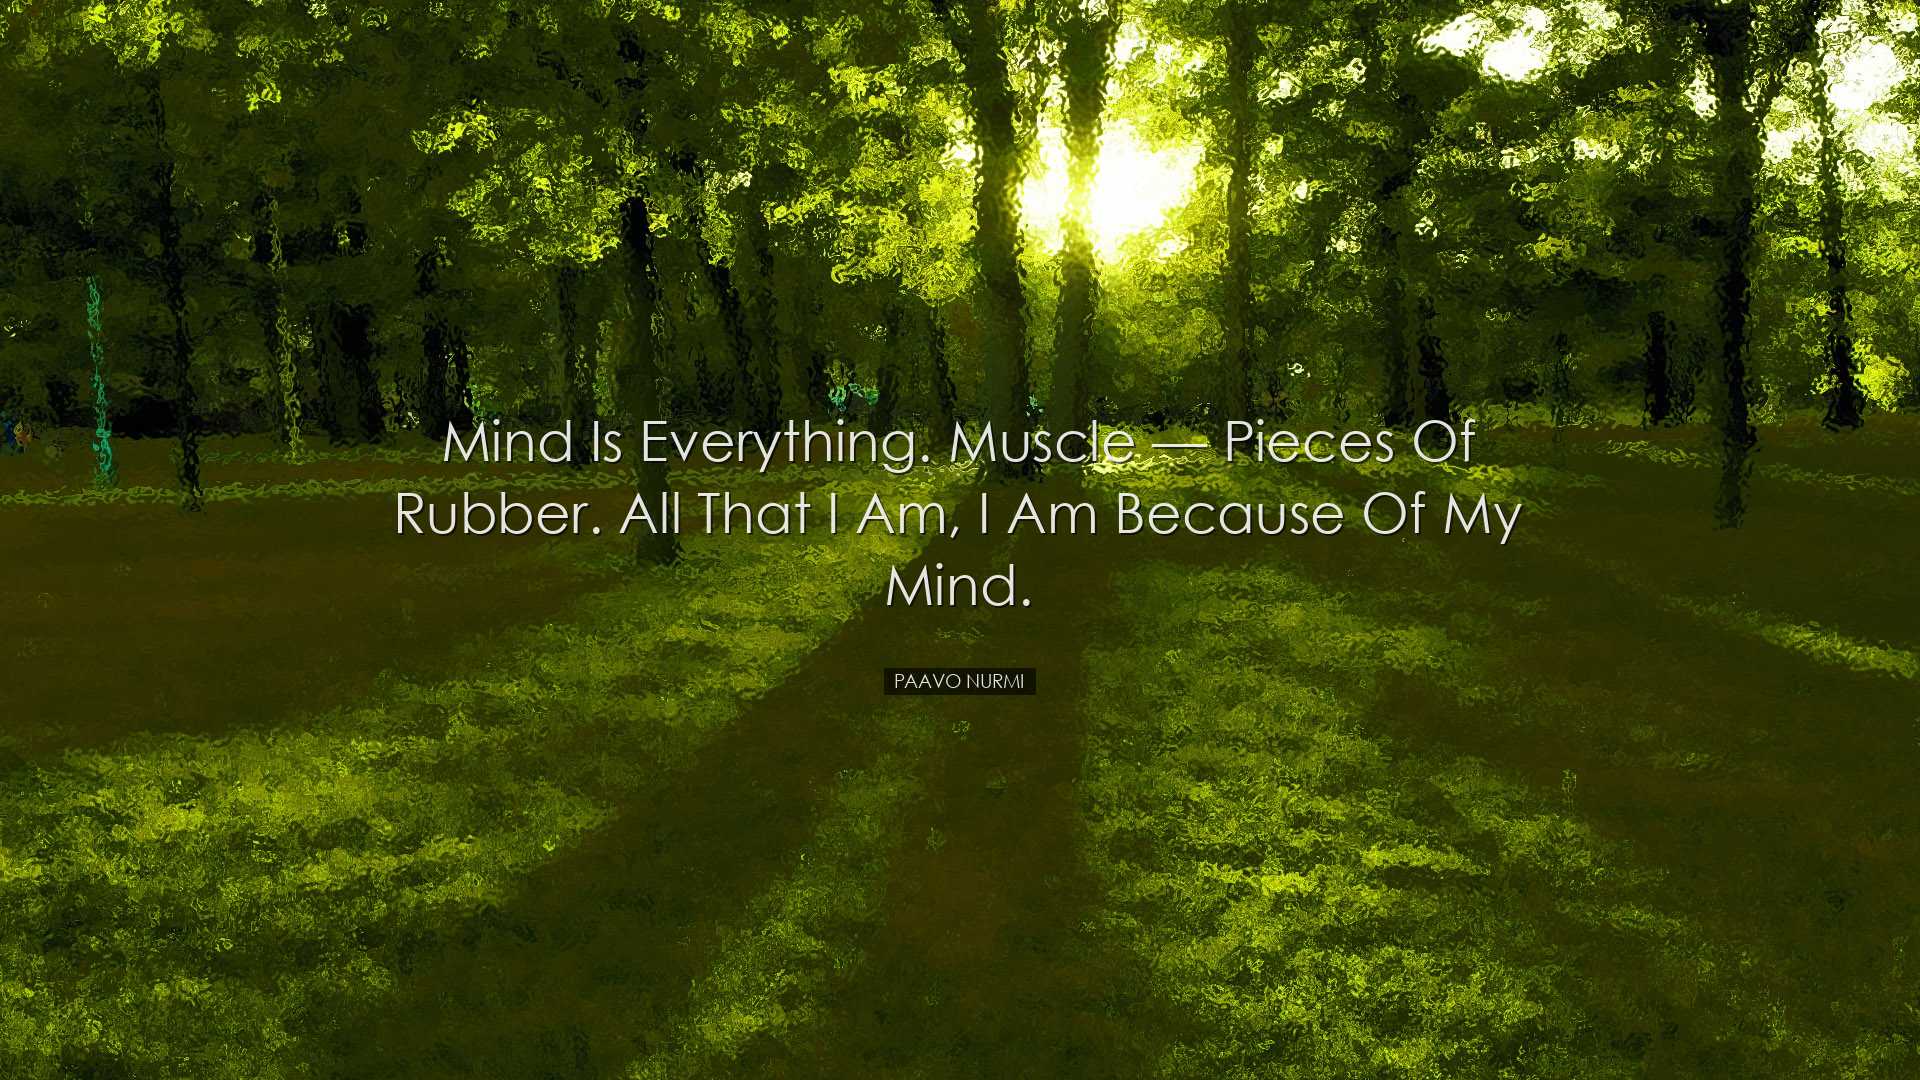 Mind is everything. Muscle — pieces of rubber. All that I am